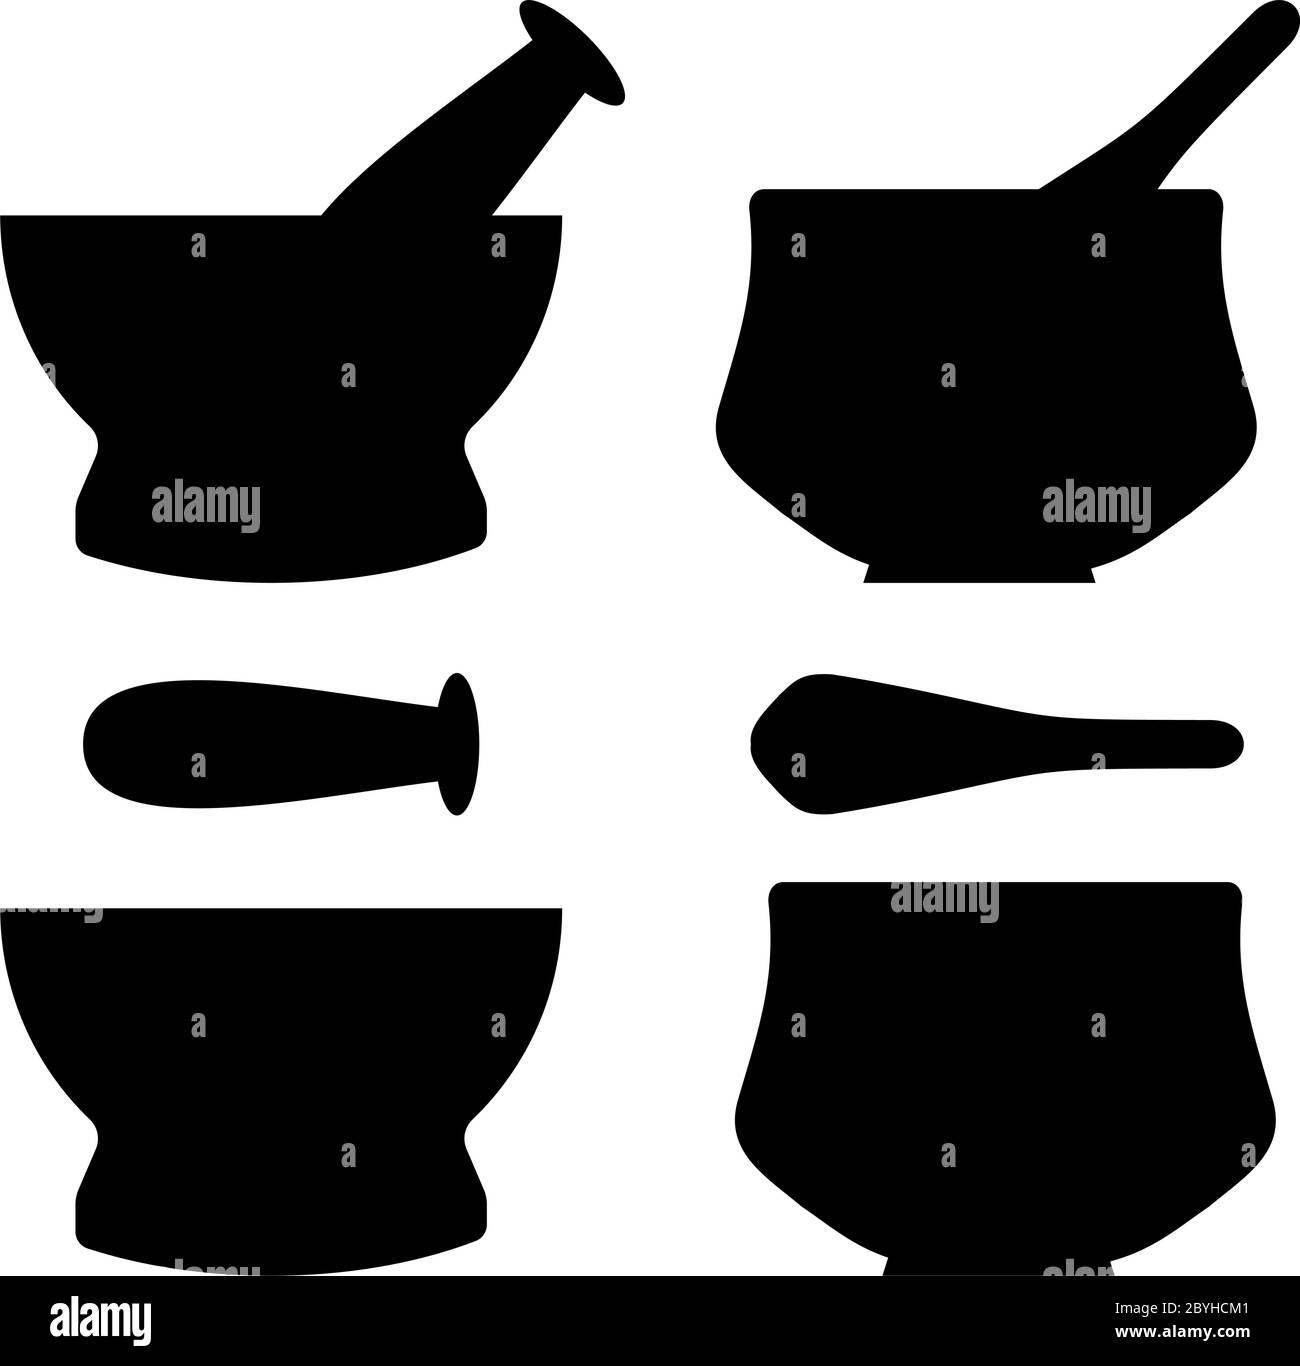 Mortar and Pestle Vector Illustration Stock Vector